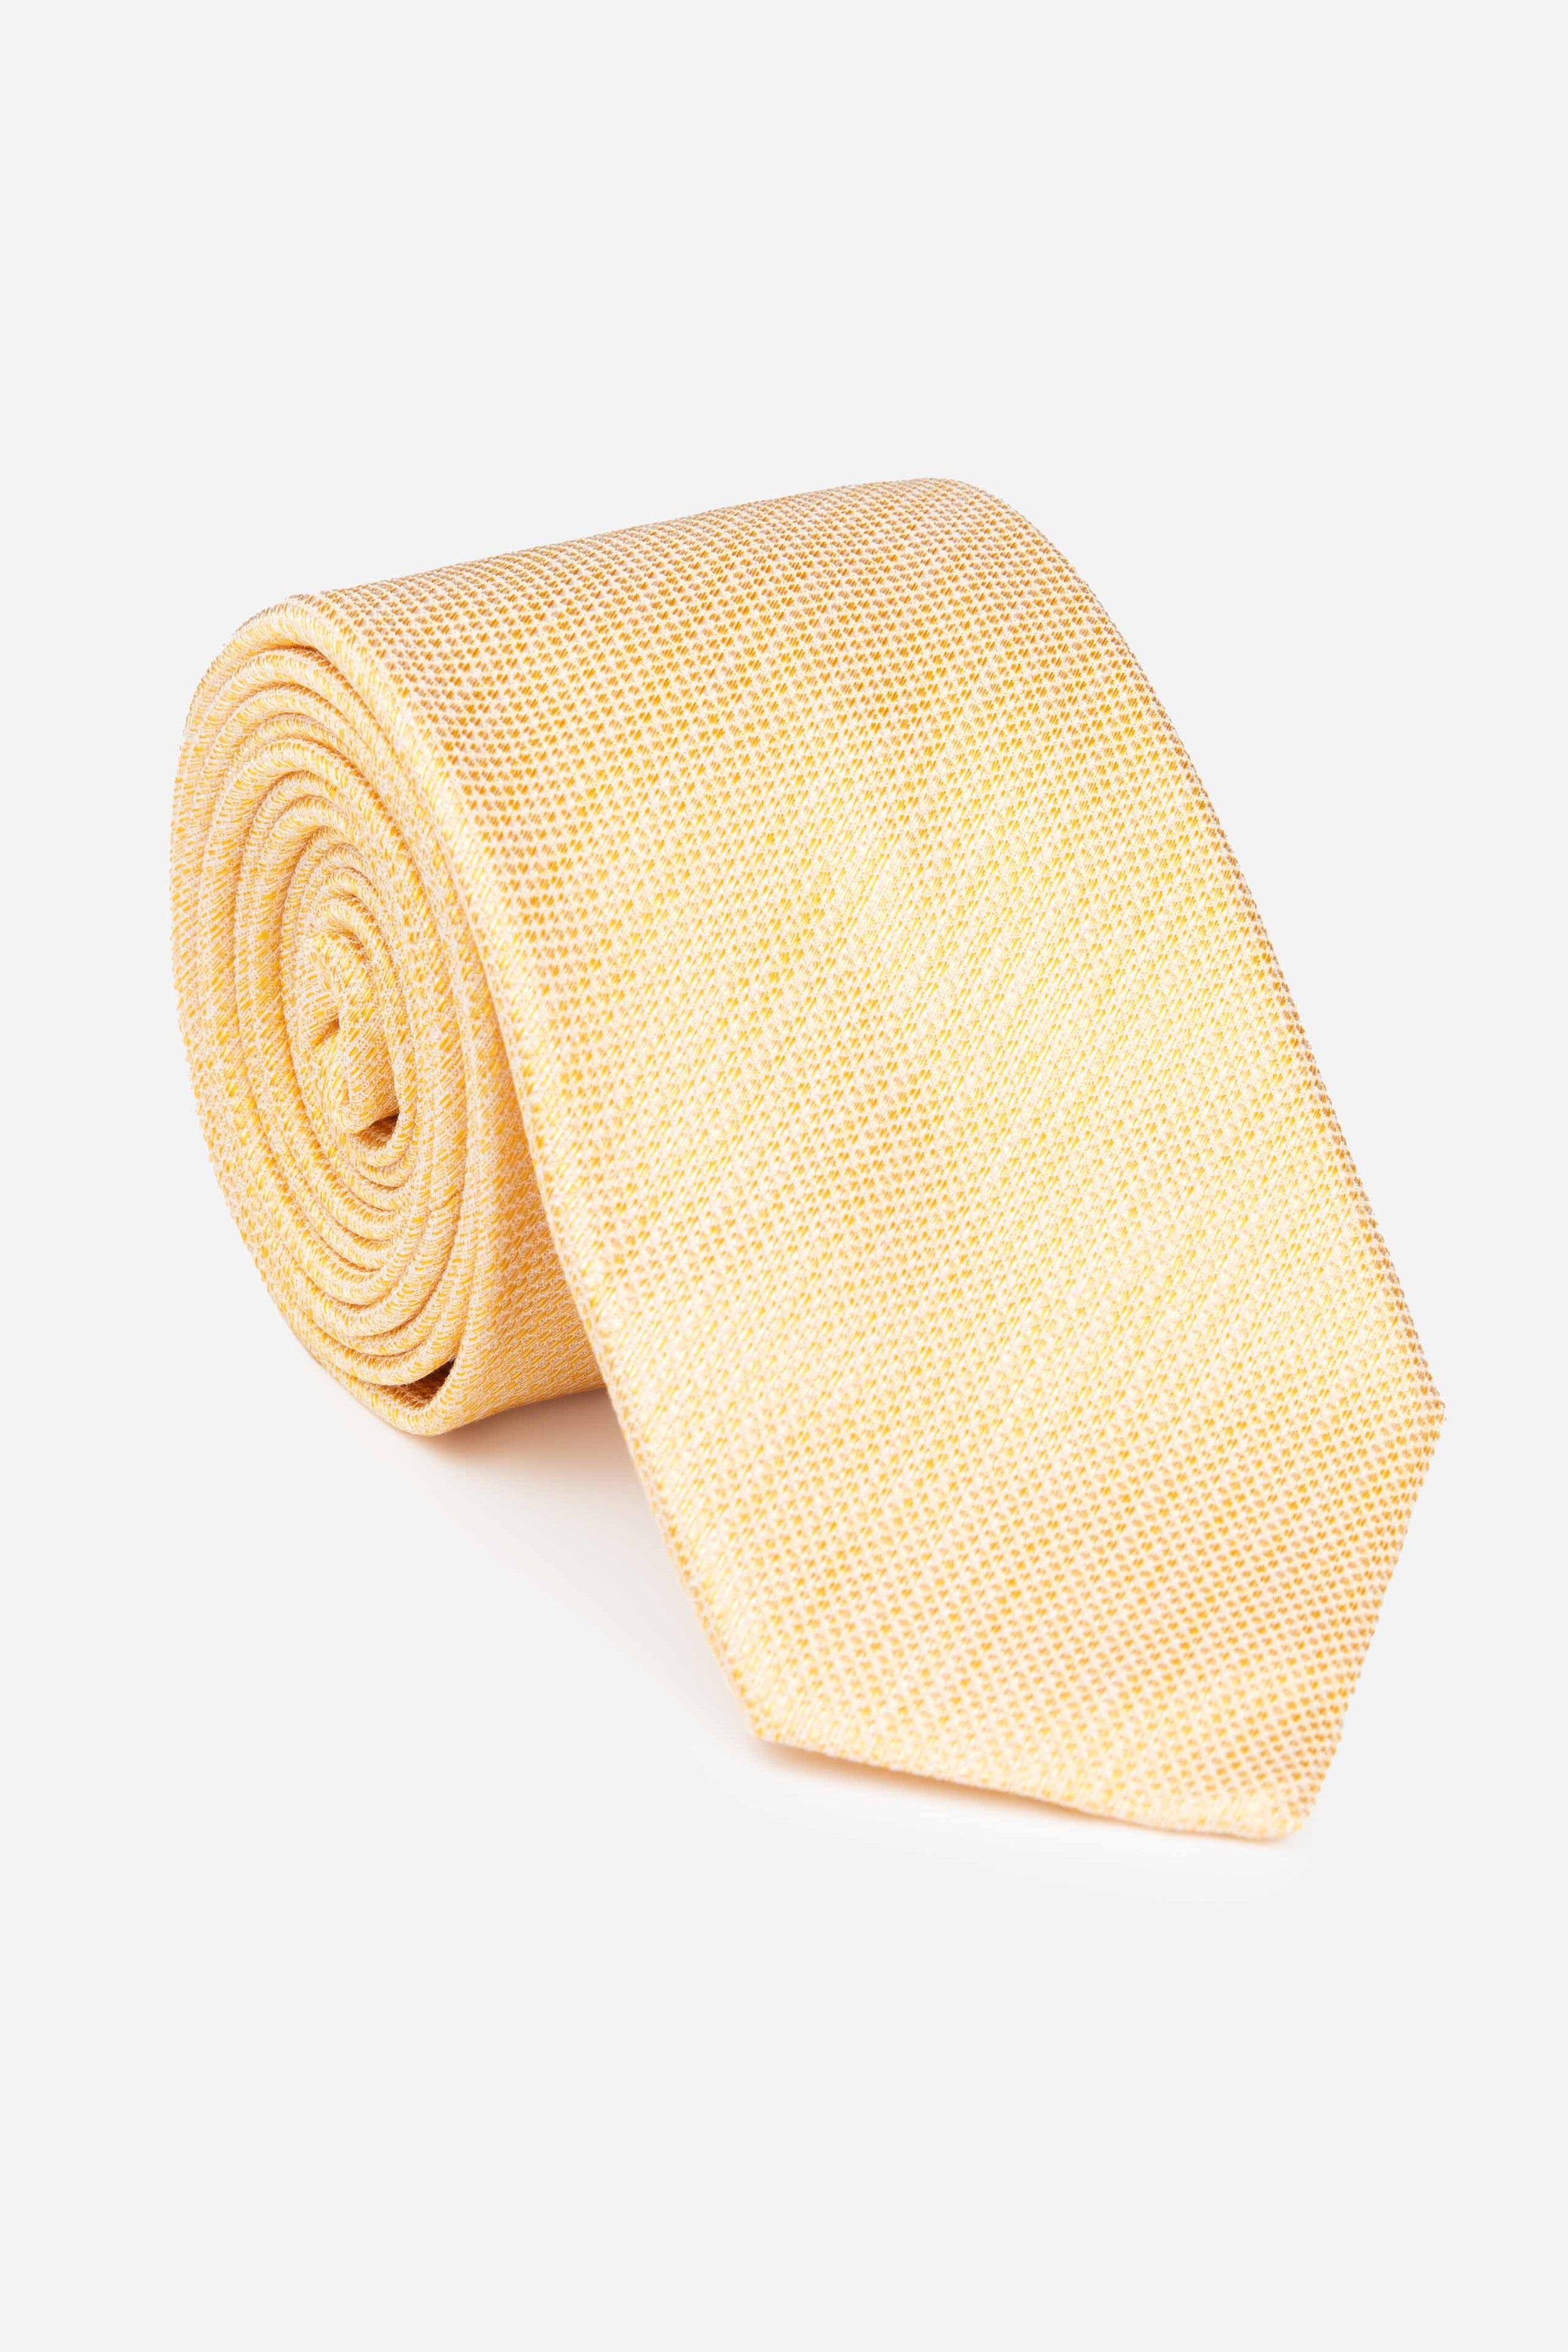 Square patterned tie - YELLOW